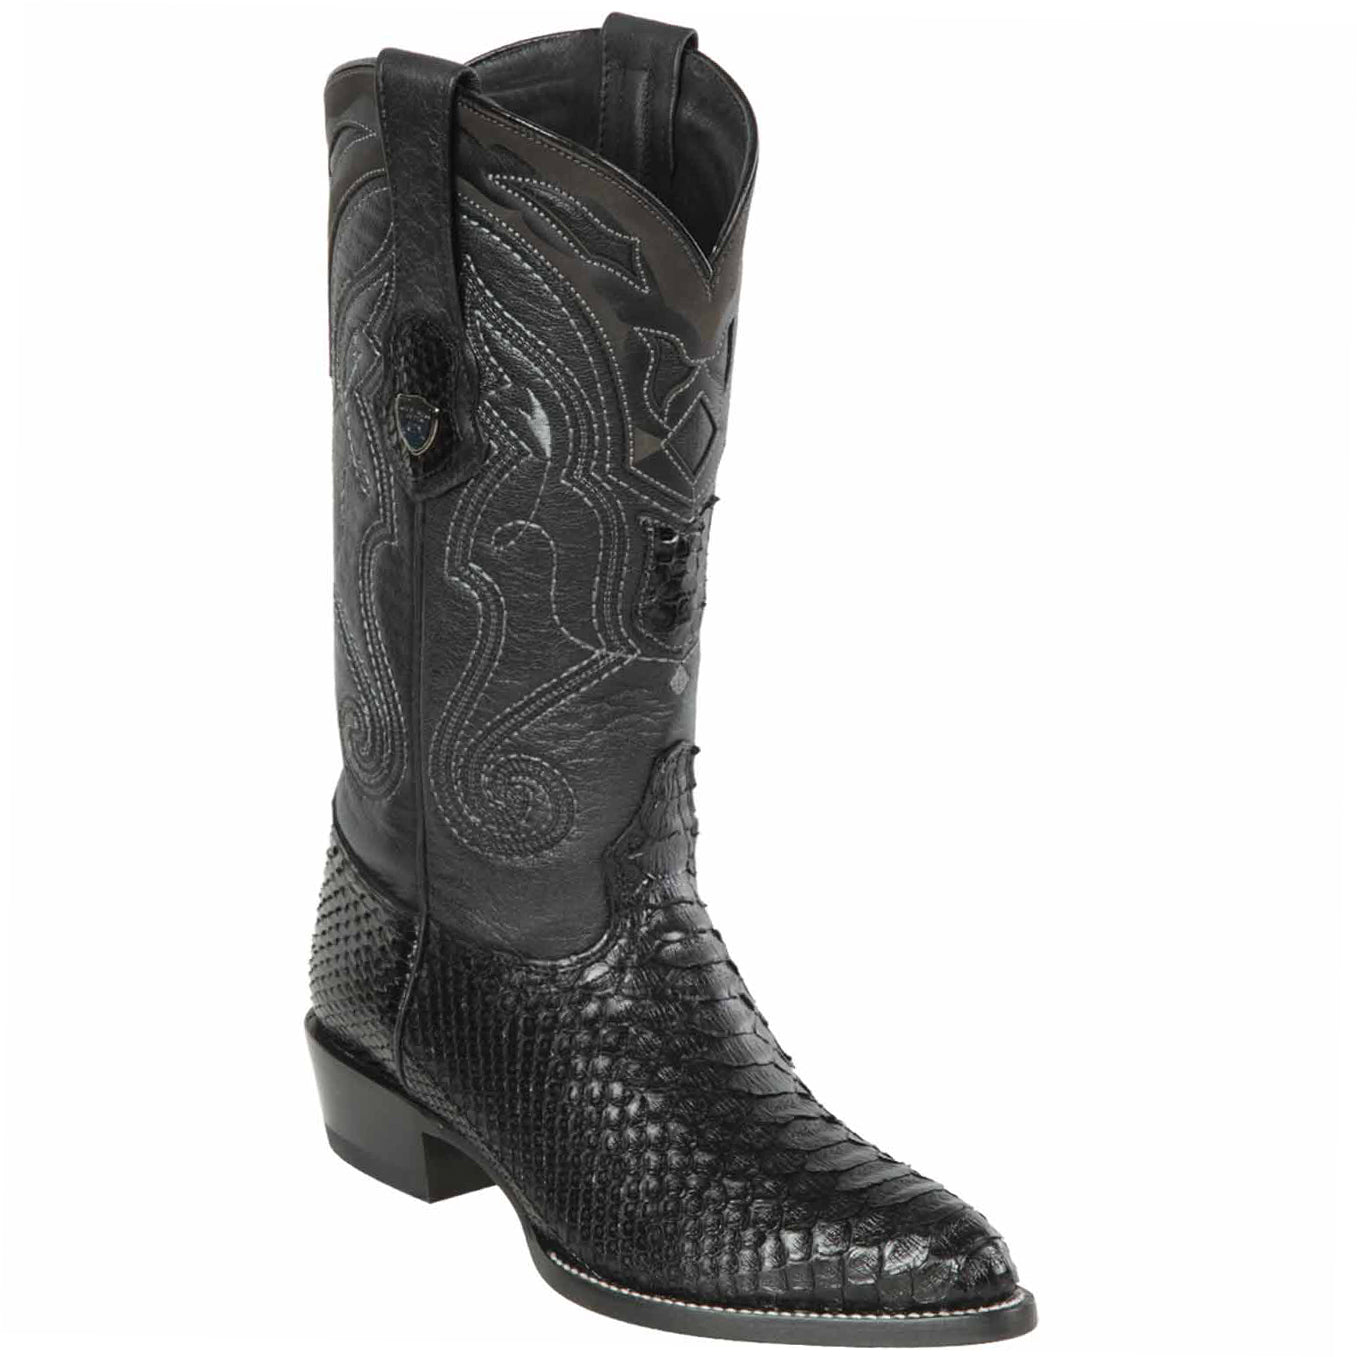 Mens Black Snakeskin Boots - Wild West Boots